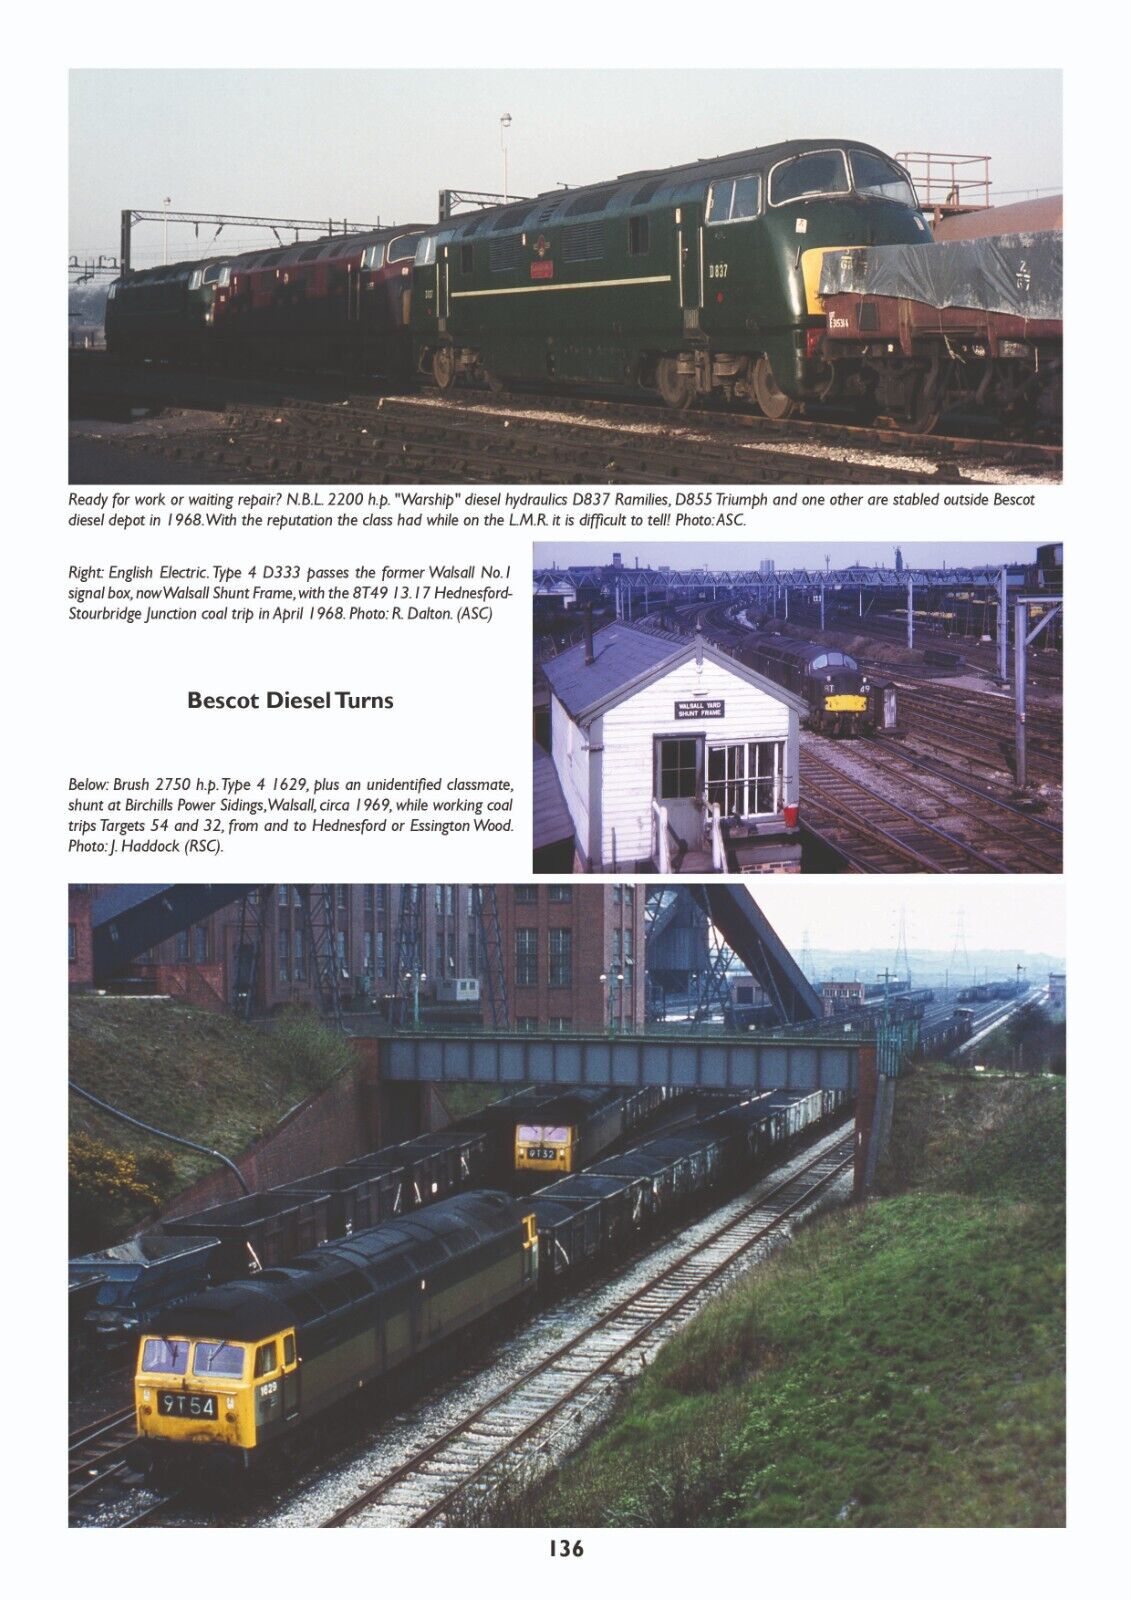 Changing Engines The Transition from Steam to Diesel and Electric Traction in the Birmingham and Rugby Districts